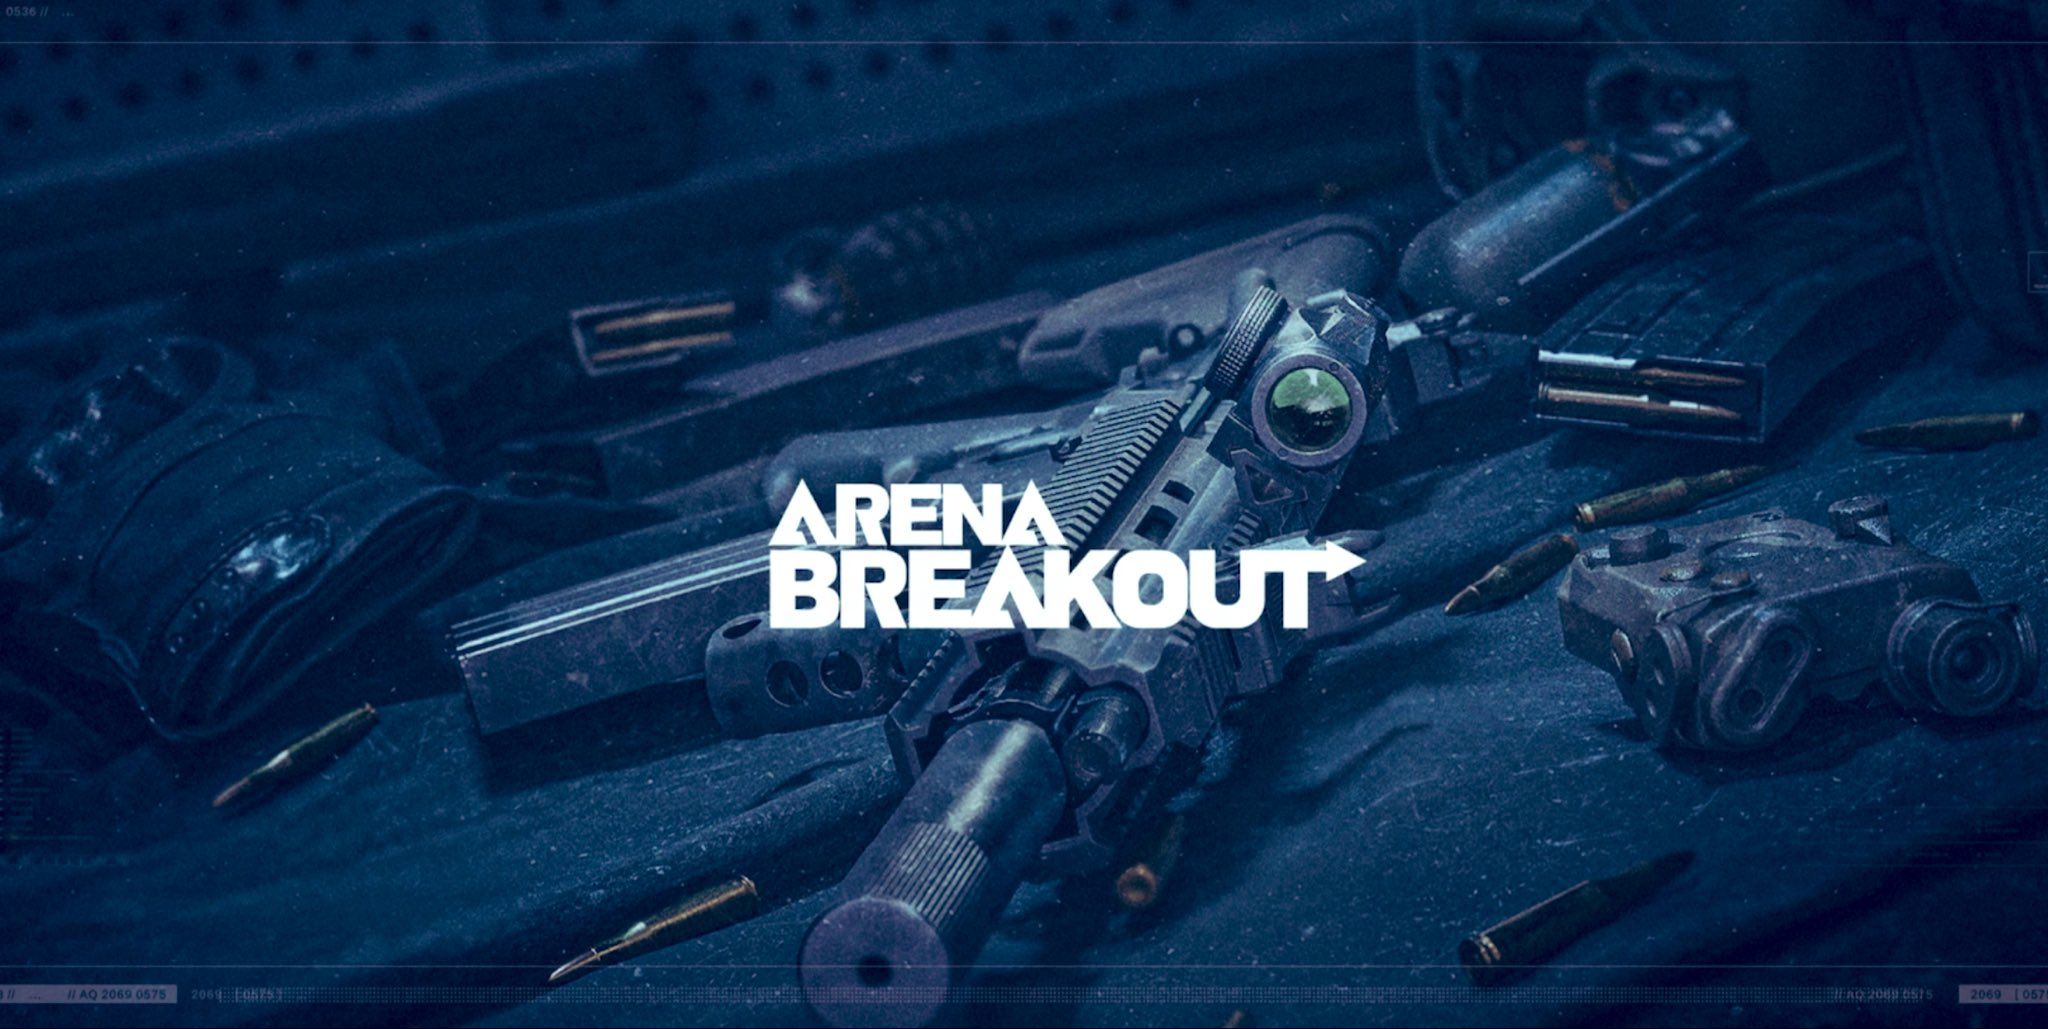 Arena breakout язык. Arena Breakout. Arena Breakout обои. Arena vrecaut. Arena Breakout пистолеты.